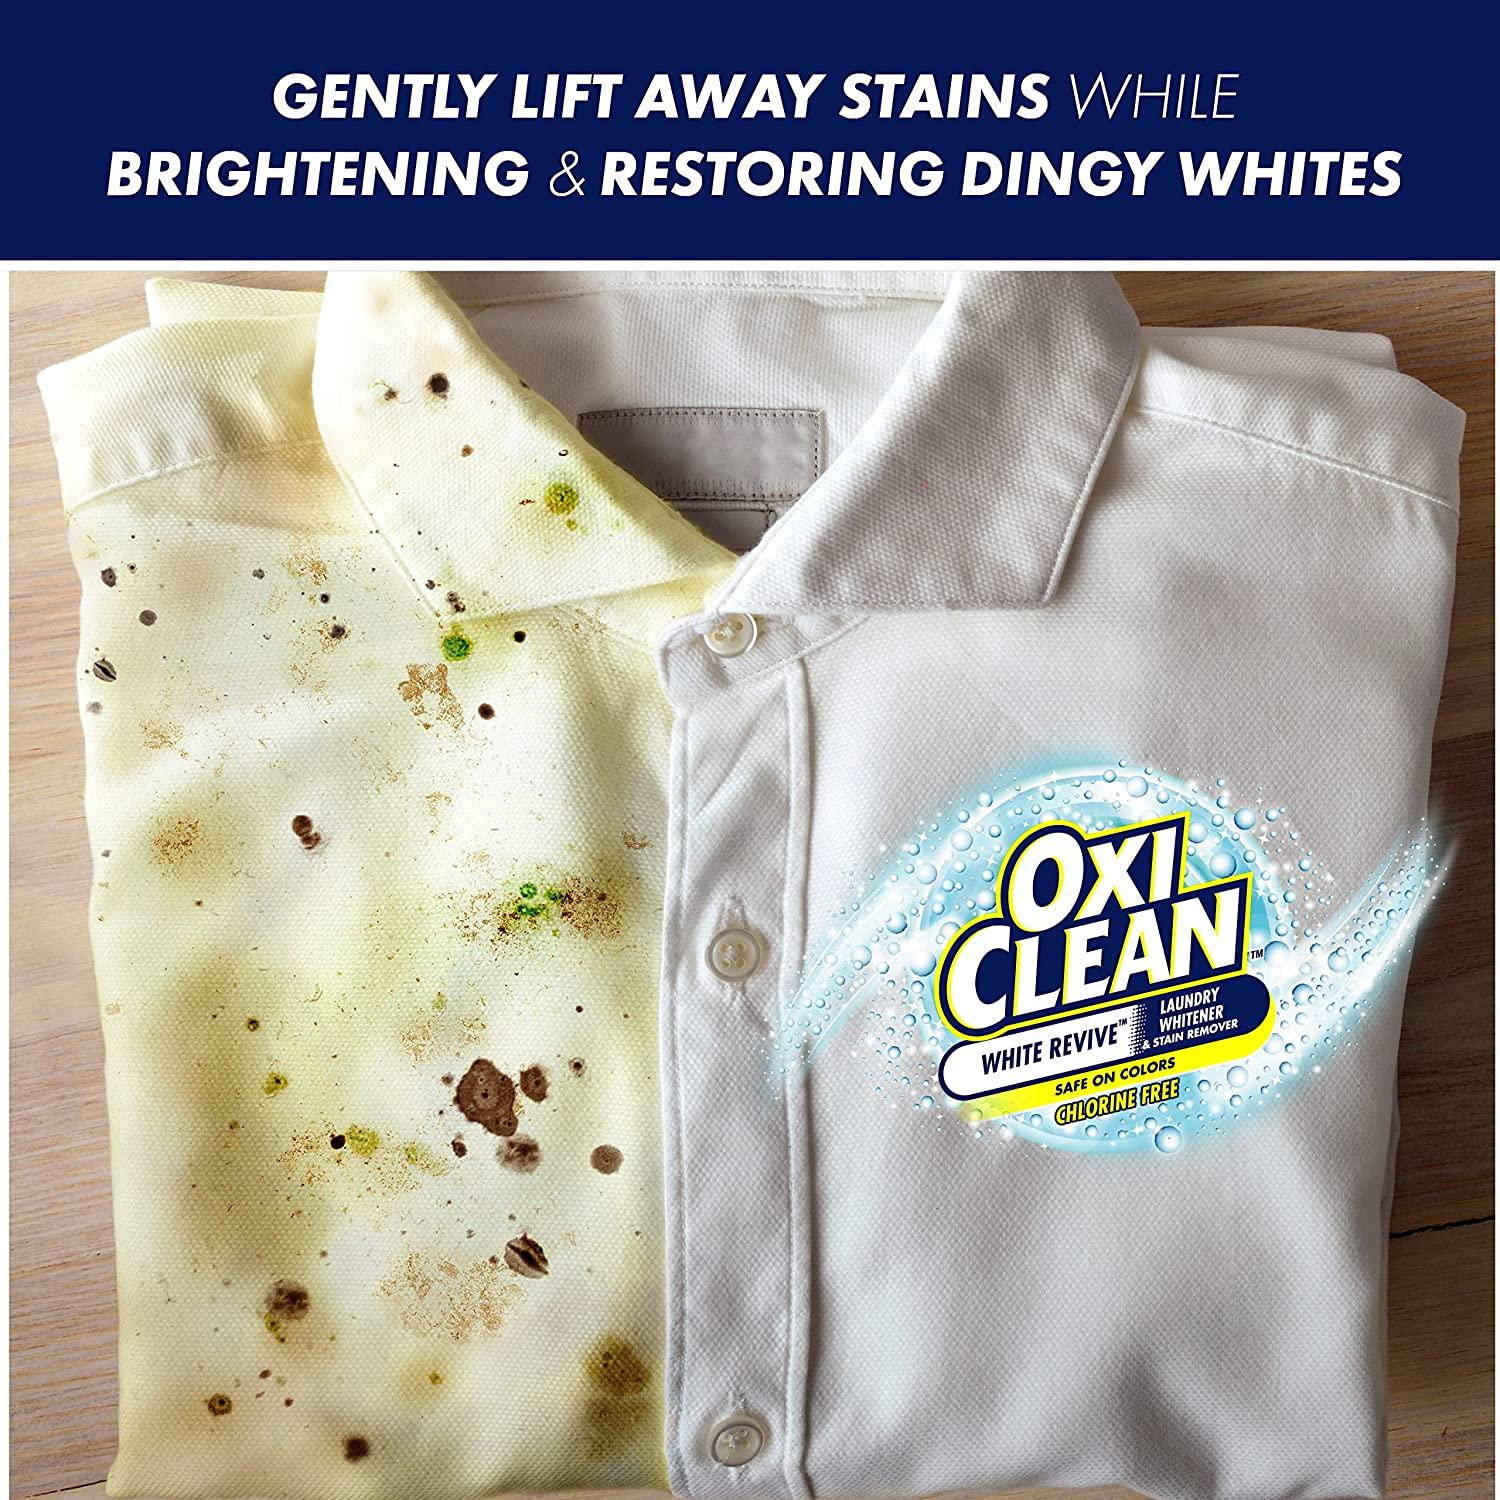 OxiClean White Revive Laundry Whitener + Stain Remover 3 lbs.